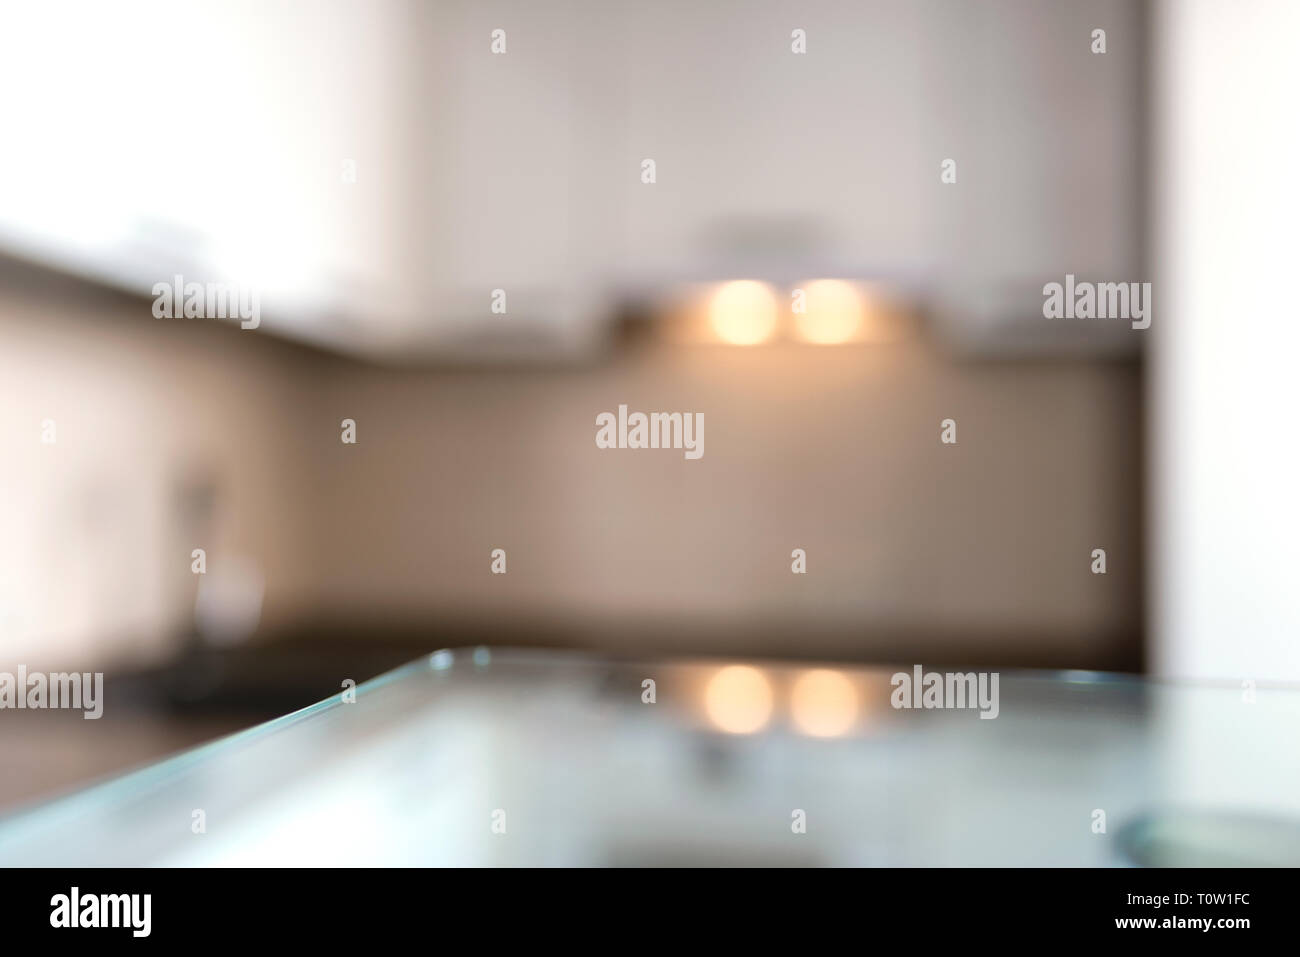 Blurred modern kitchen background with glass stand. With copy space for your design. Stock Photo